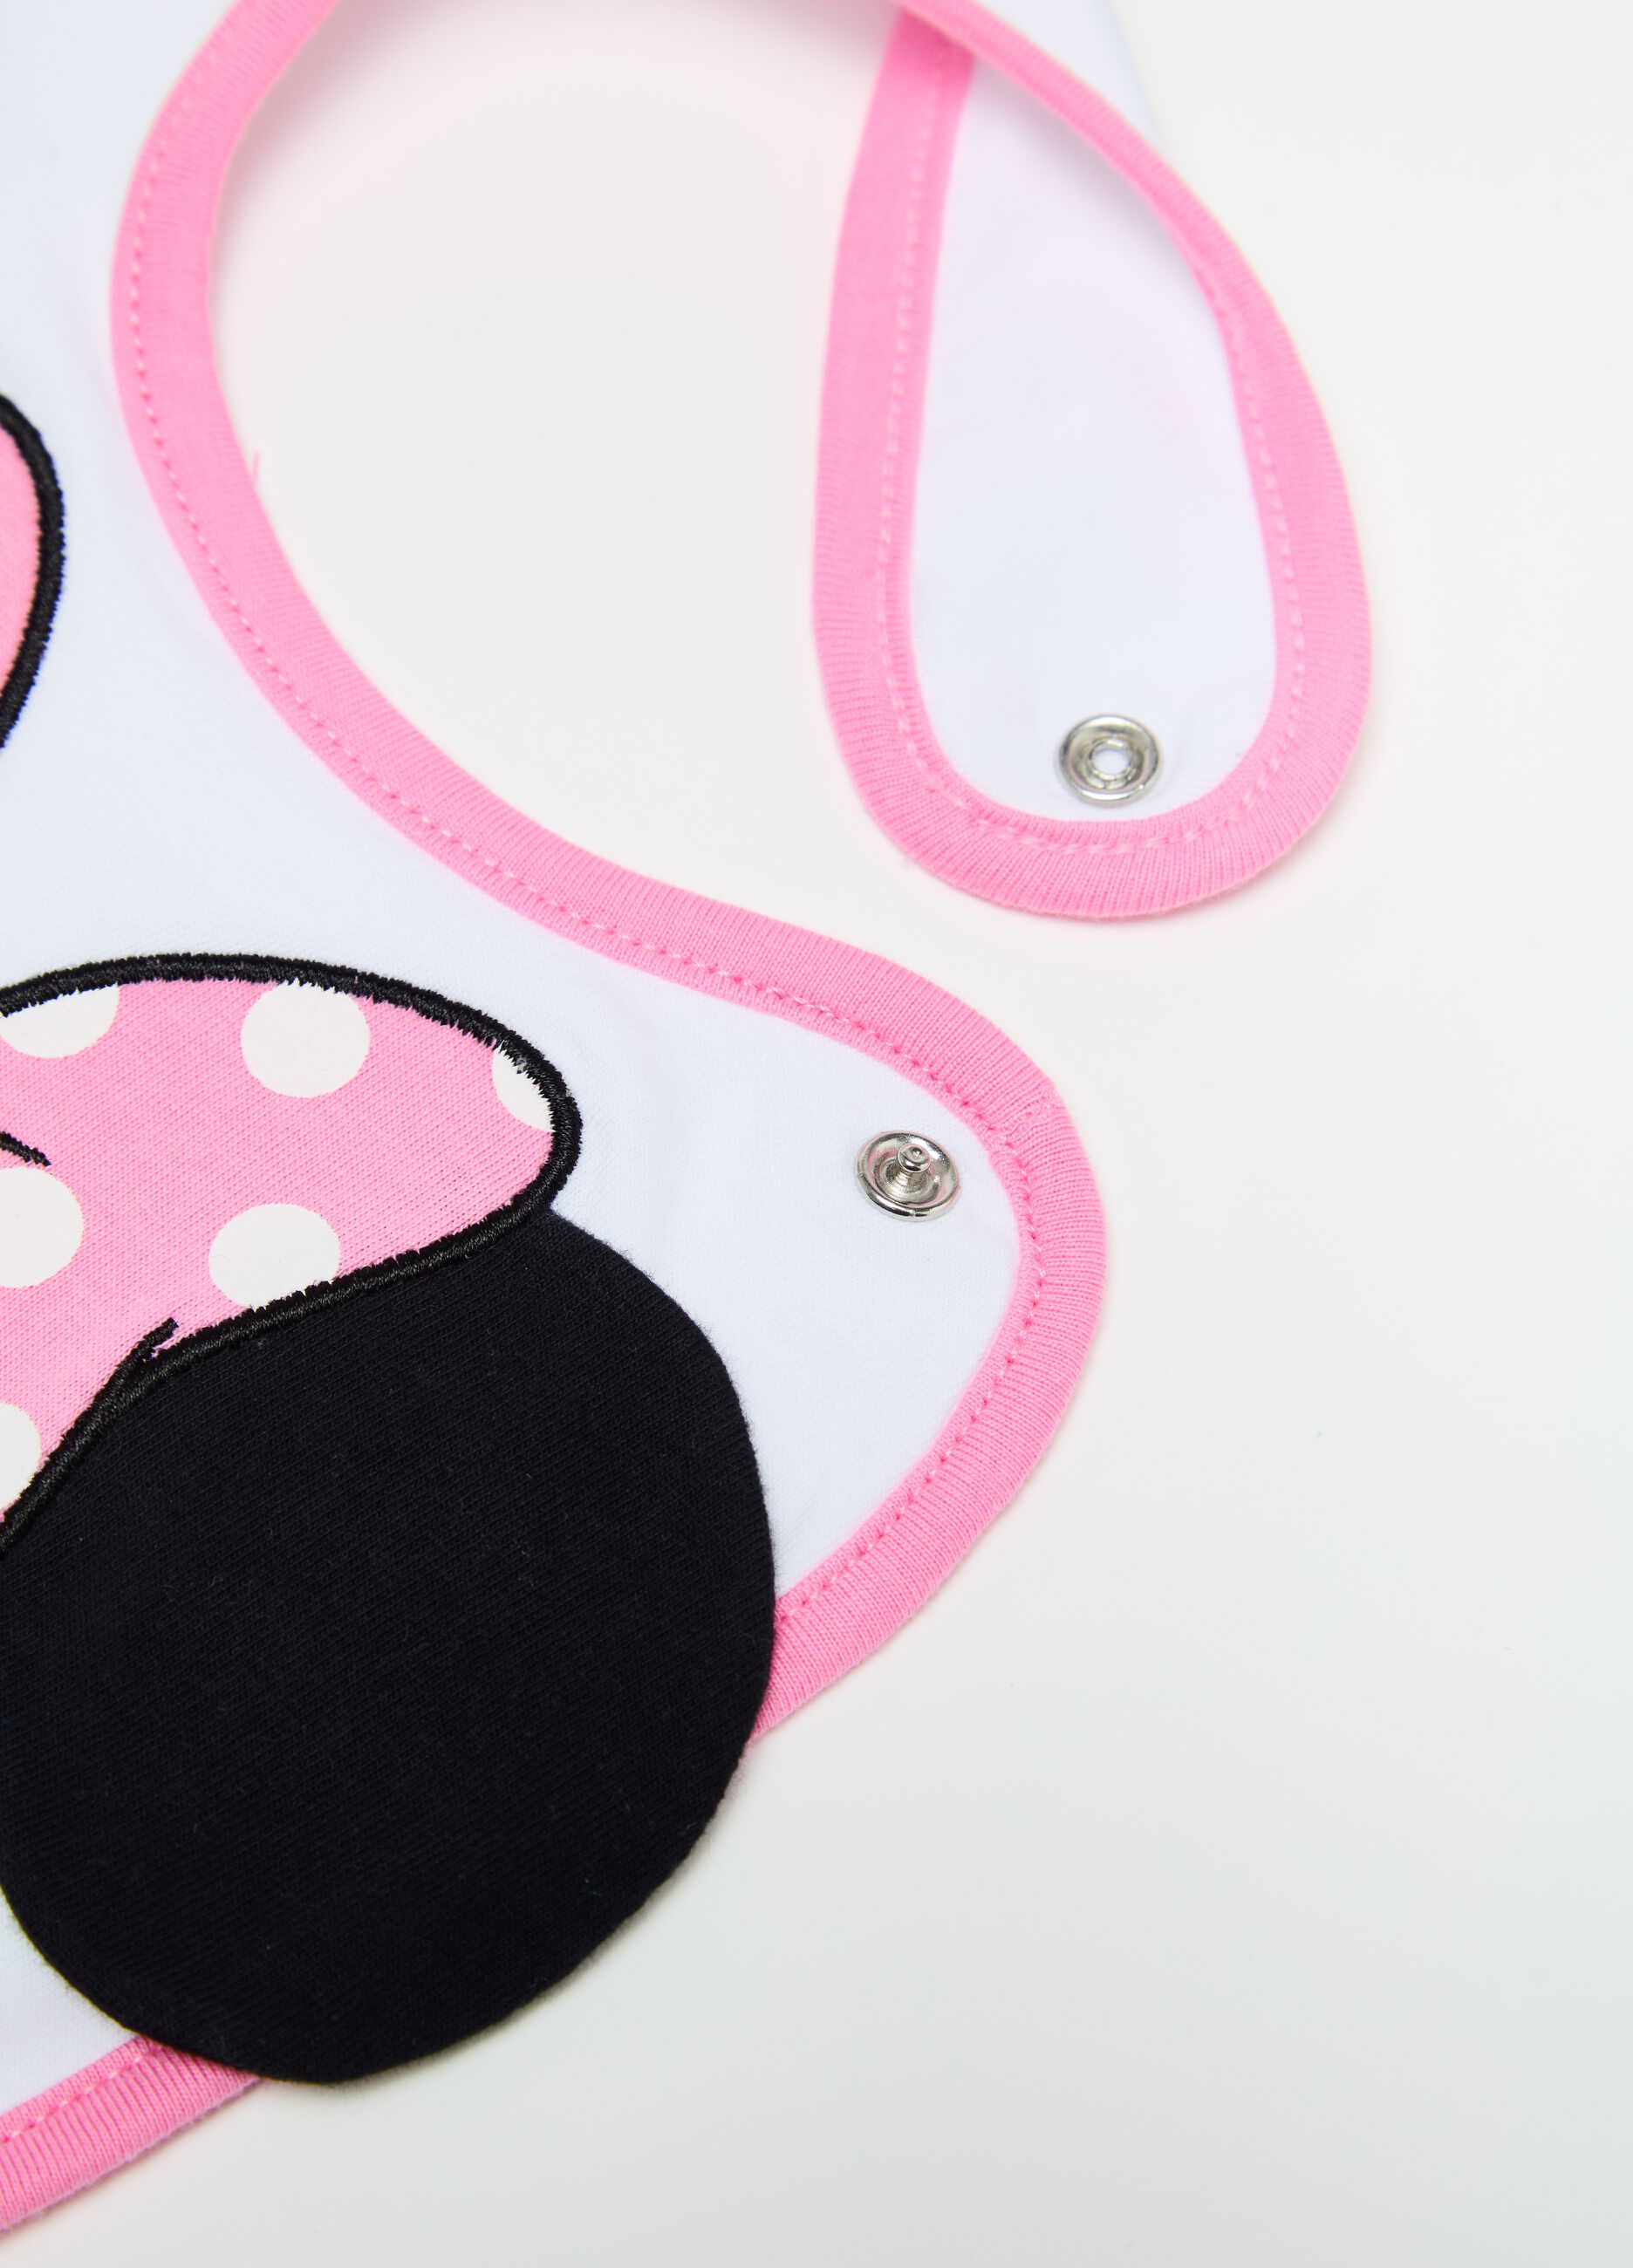 Cotton bib with Minnie Mouse embroidery